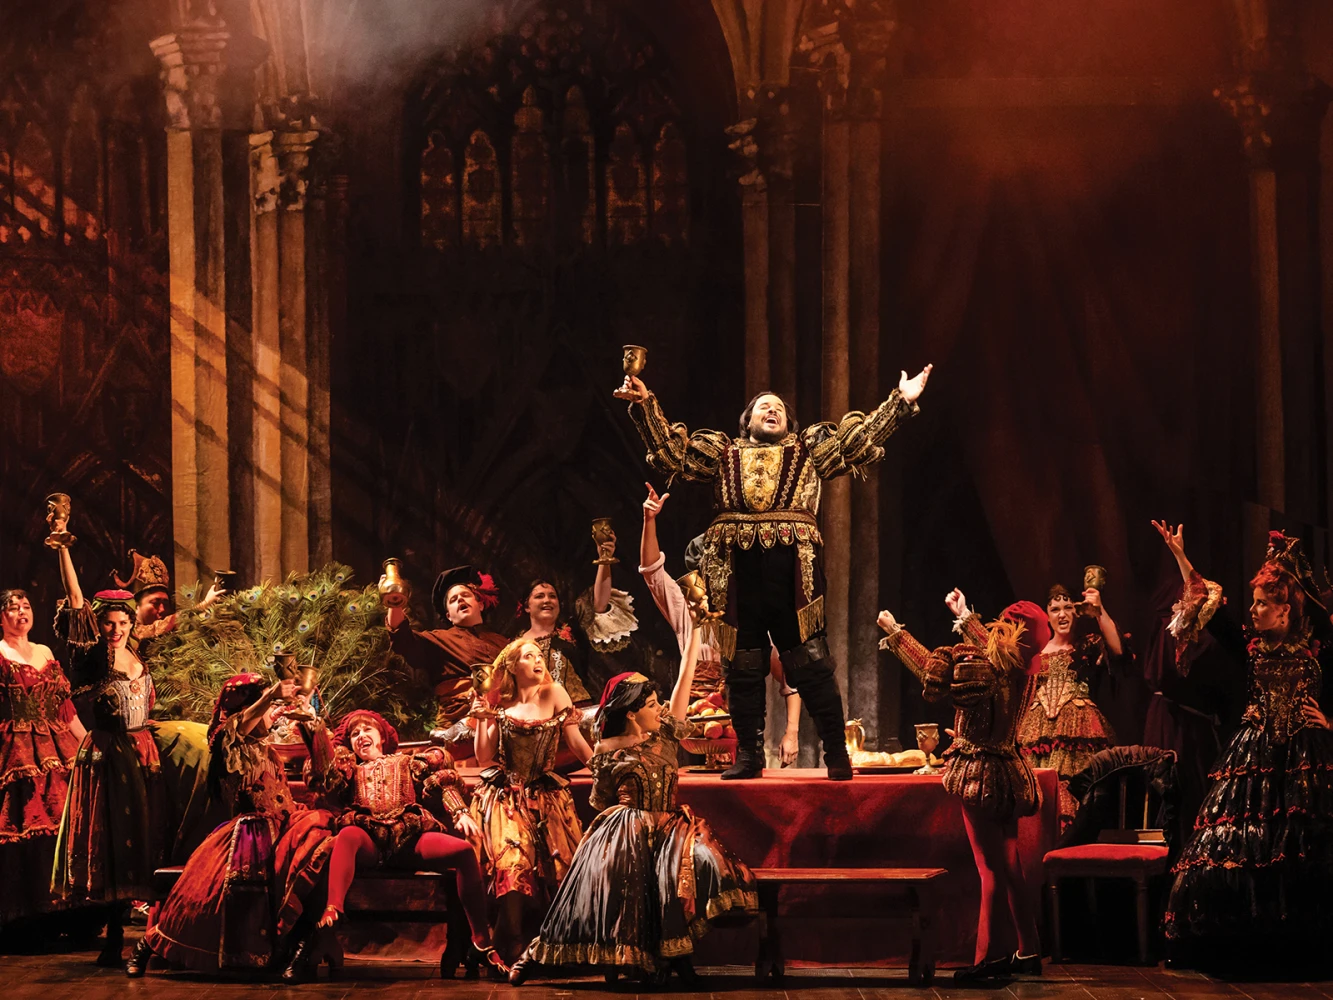 The Phantom of the Opera: What to expect - 8